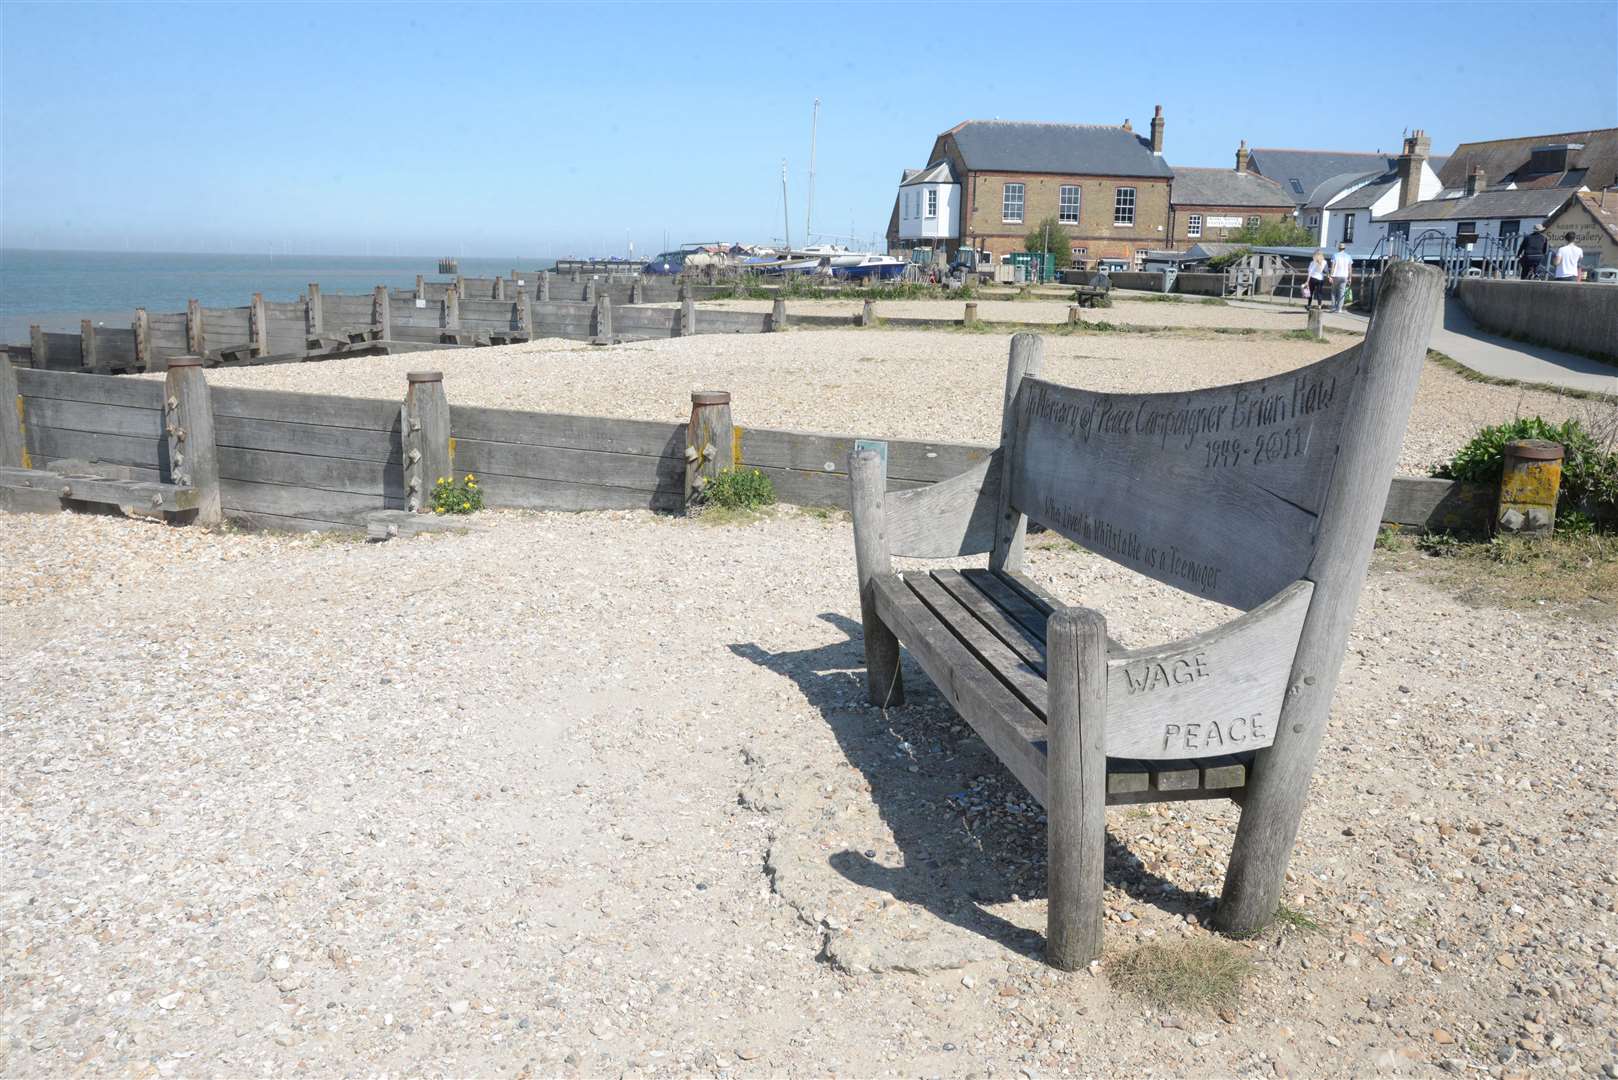 Coastal towns such as Whitstable are expected to bounce back from the lockdowns as more staycations are expected this year